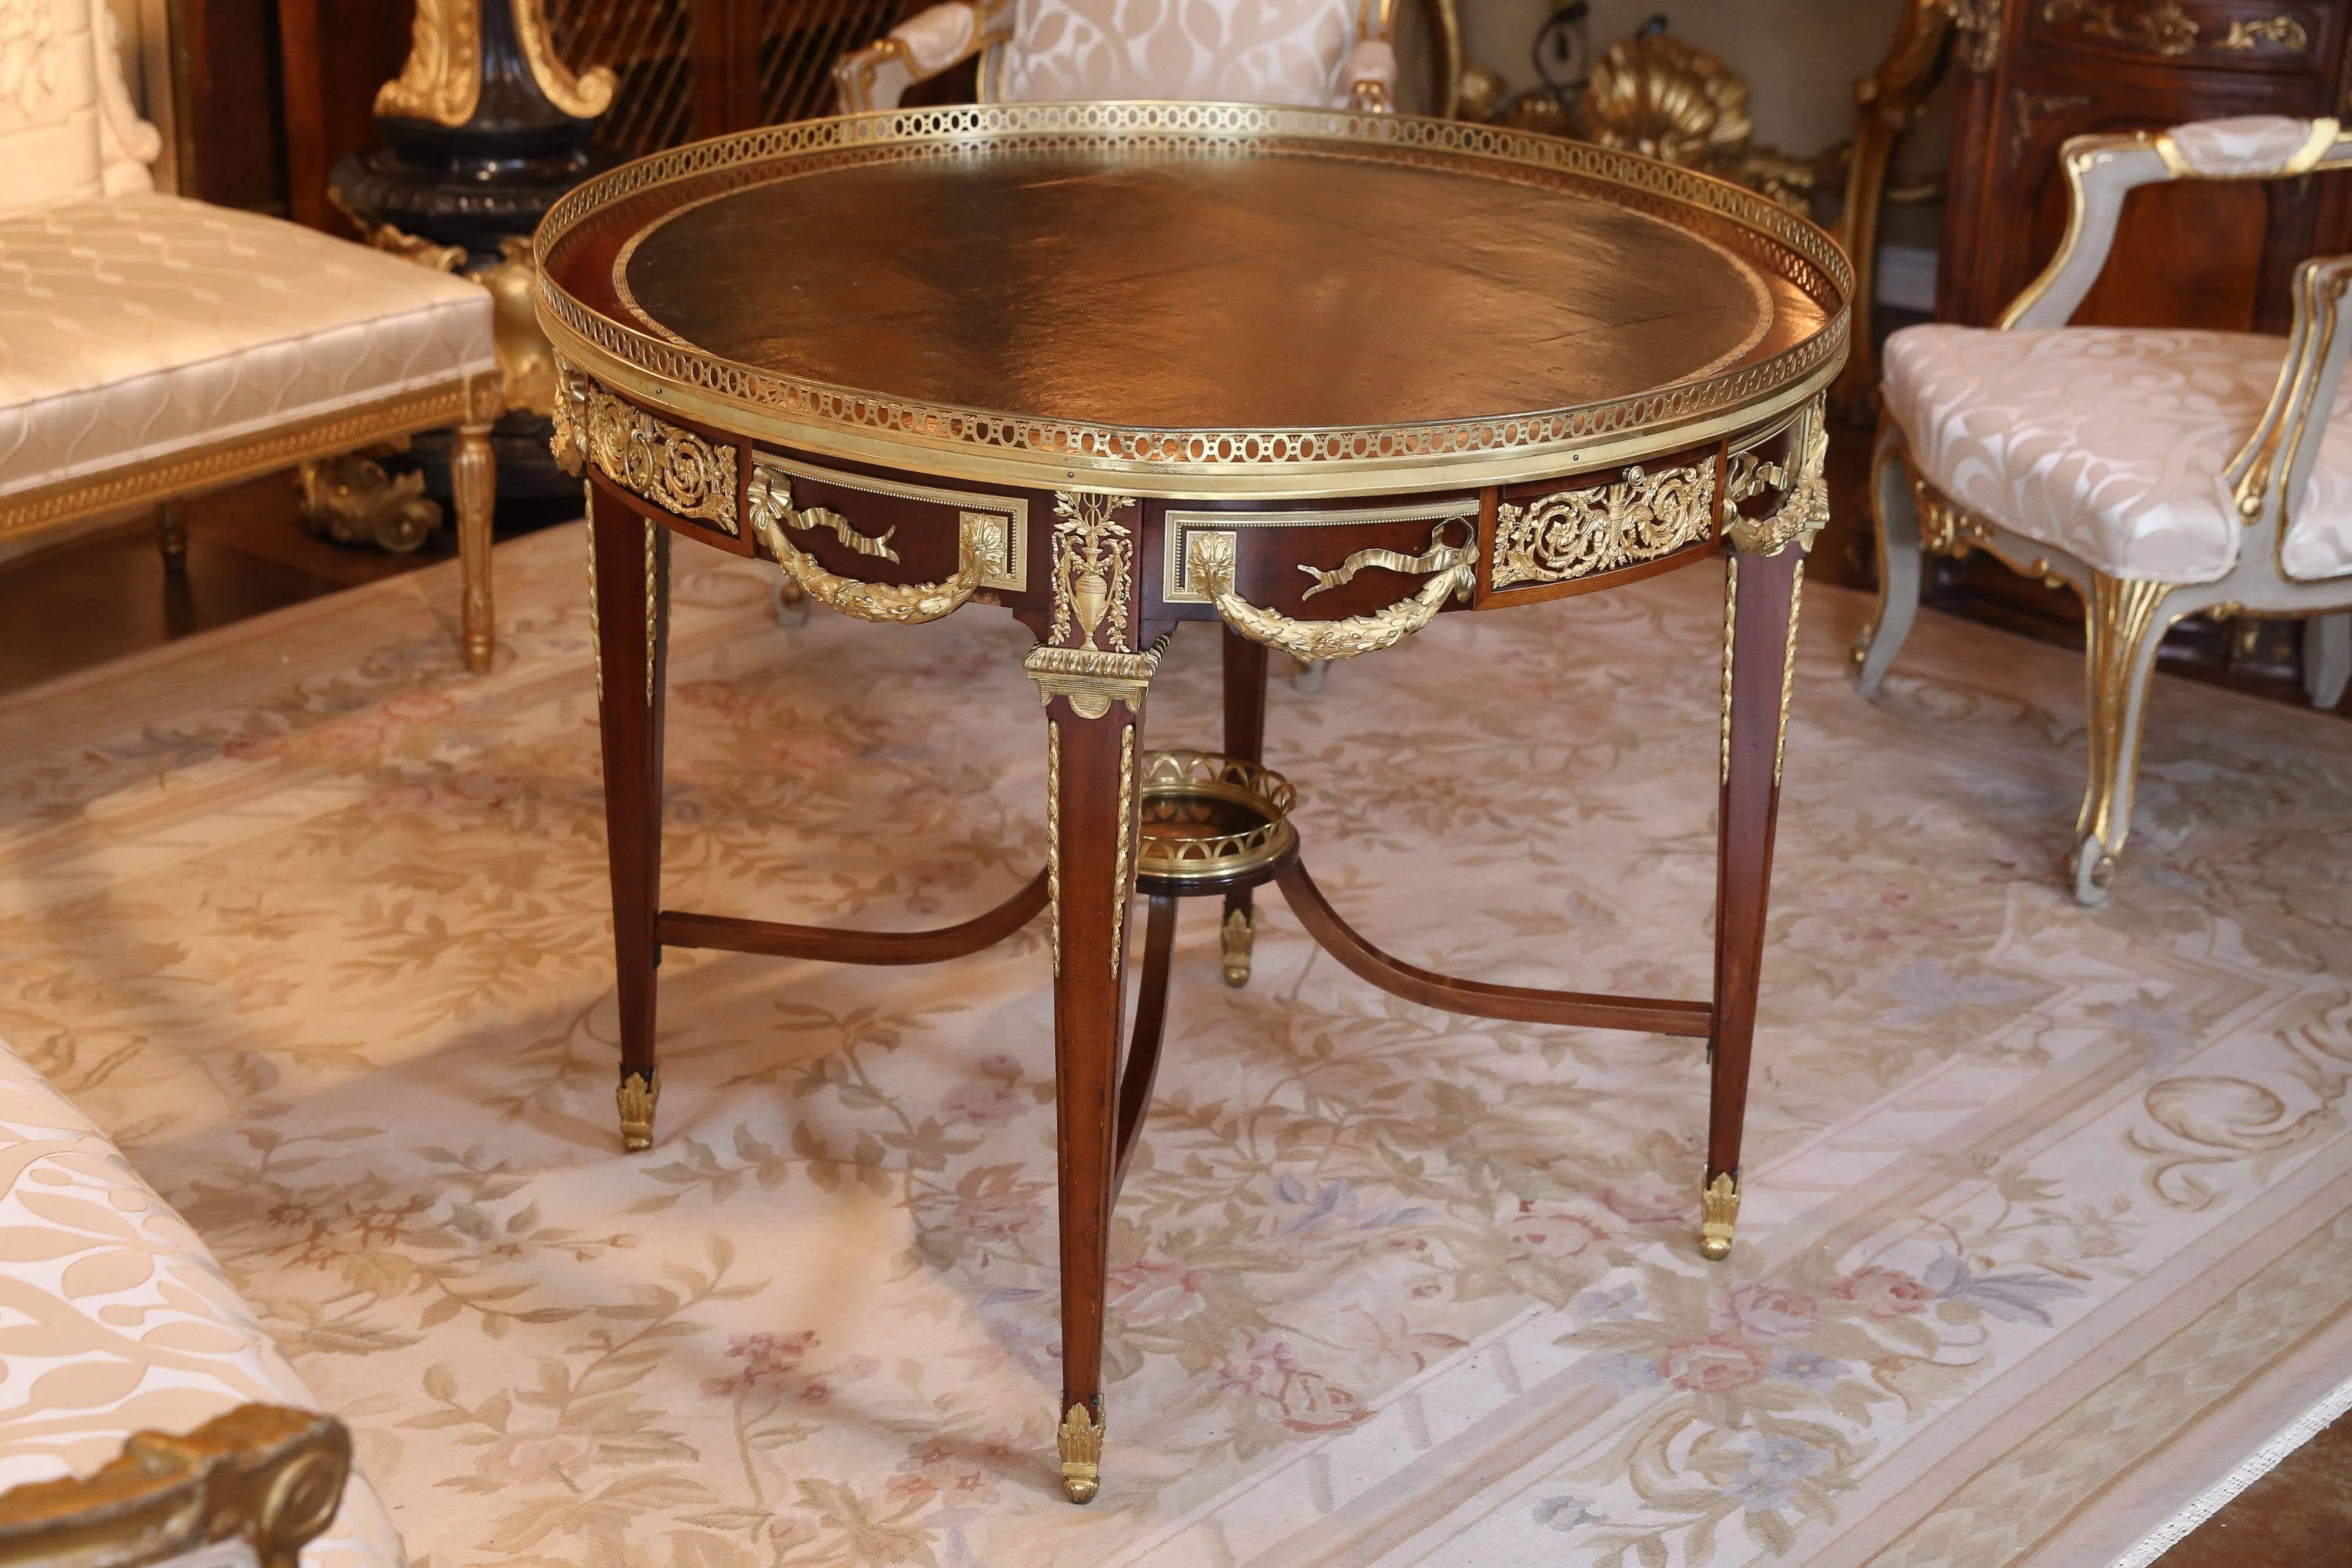 Round French center table with brass gallery, two-drawers and four sides in the apron, the whole decorated with elaborate gilt bronze mounts, standing on 
four square tapered legs with ormolu feet and connected by upswept stretchers with central